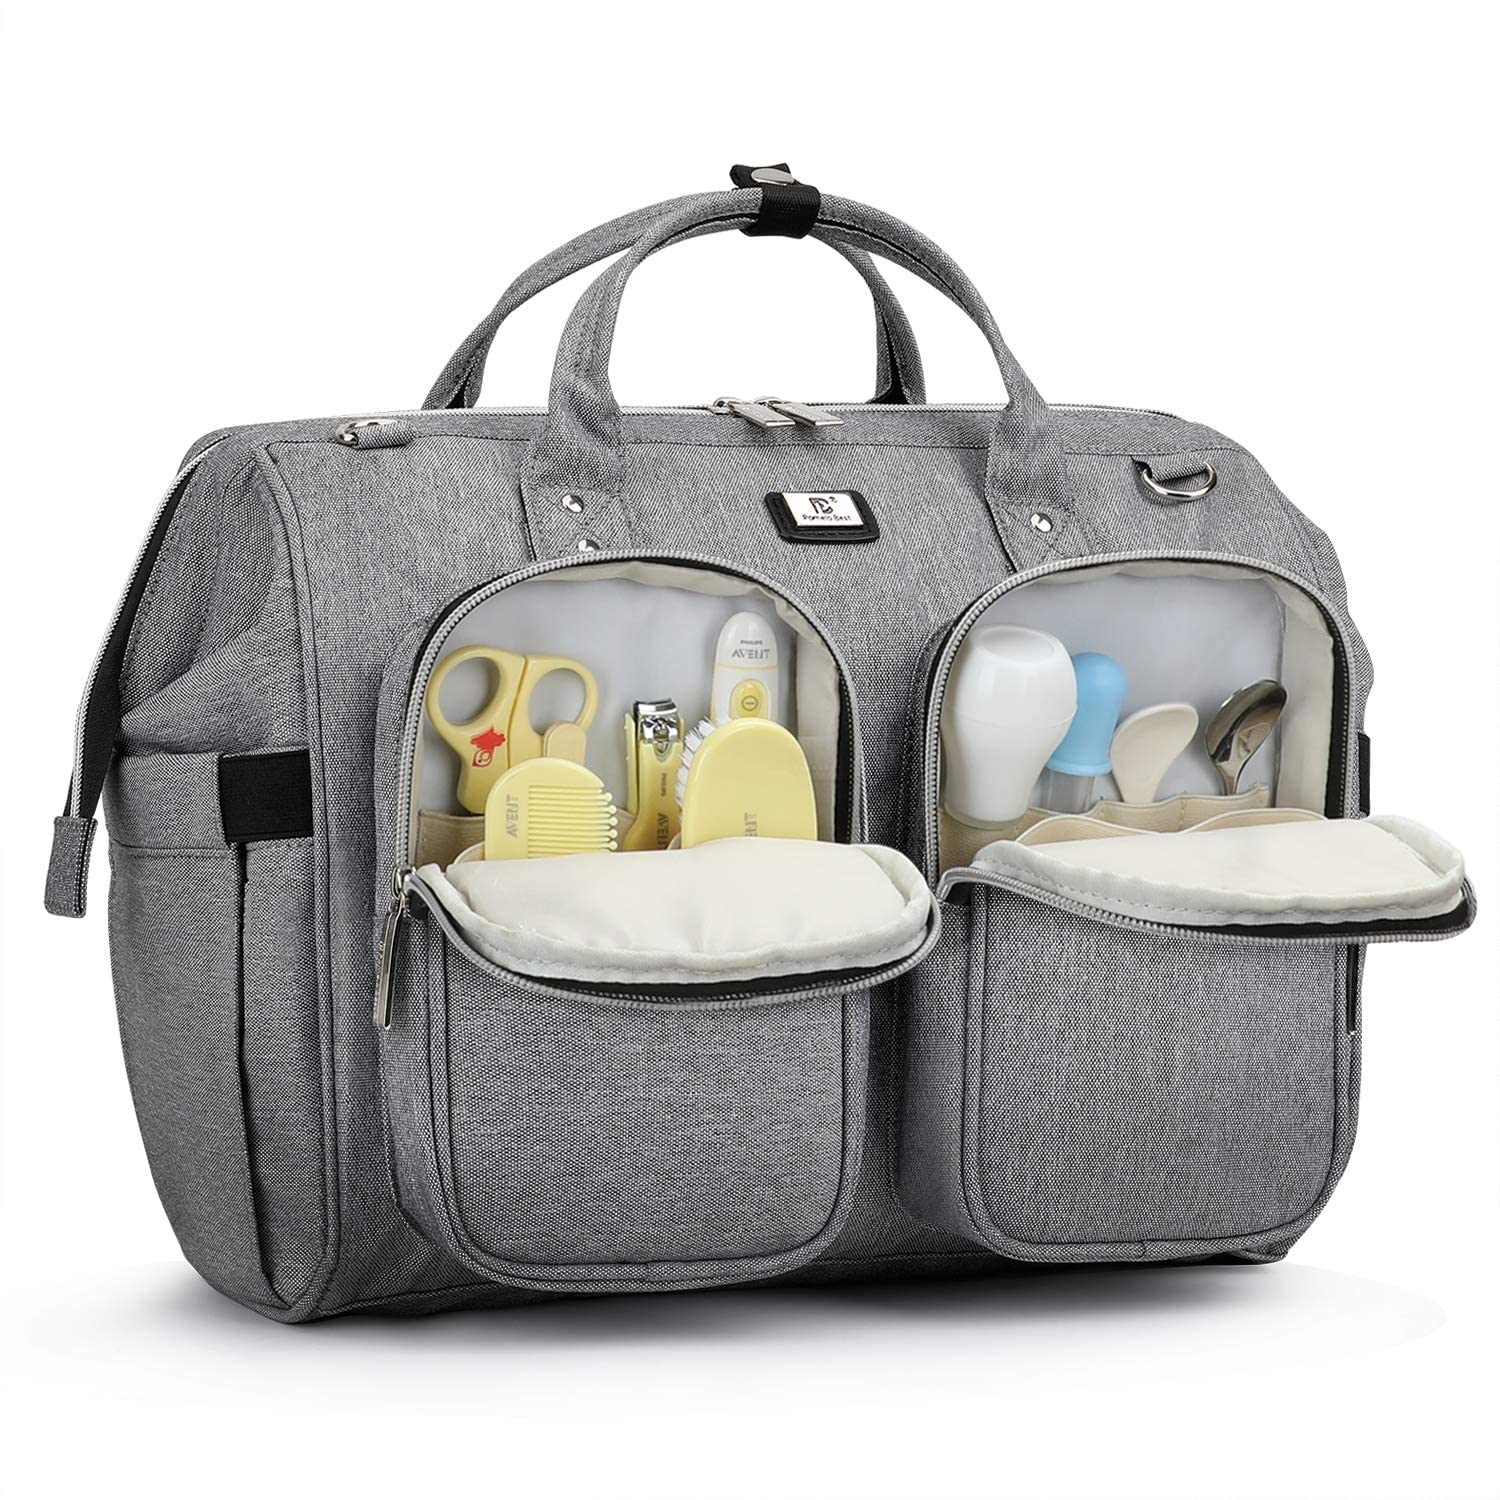 Diaper Bag Tote with Stroller Straps and Changing Pad